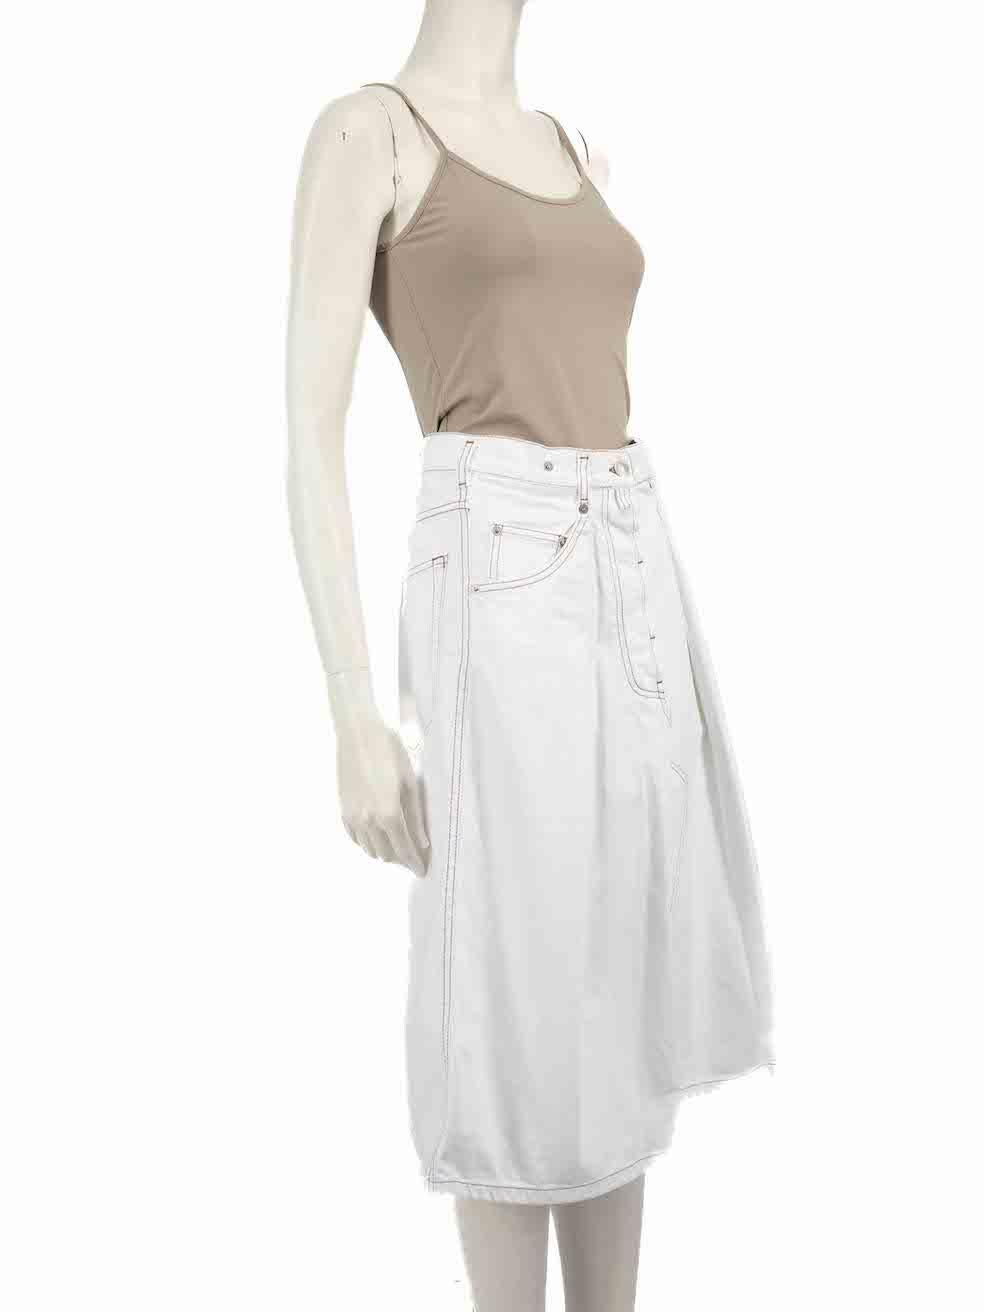 CONDITION is Very good. Minimal wear to skirt is evident. Minimal wear to the front with a small mark on this used Dries Van Noten designer resale item.
 
 
 
 Details
 
 
 White
 
 Denim
 
 Skirt
 
 Midi
 
 Brown contrast stitching
 
 3x Front